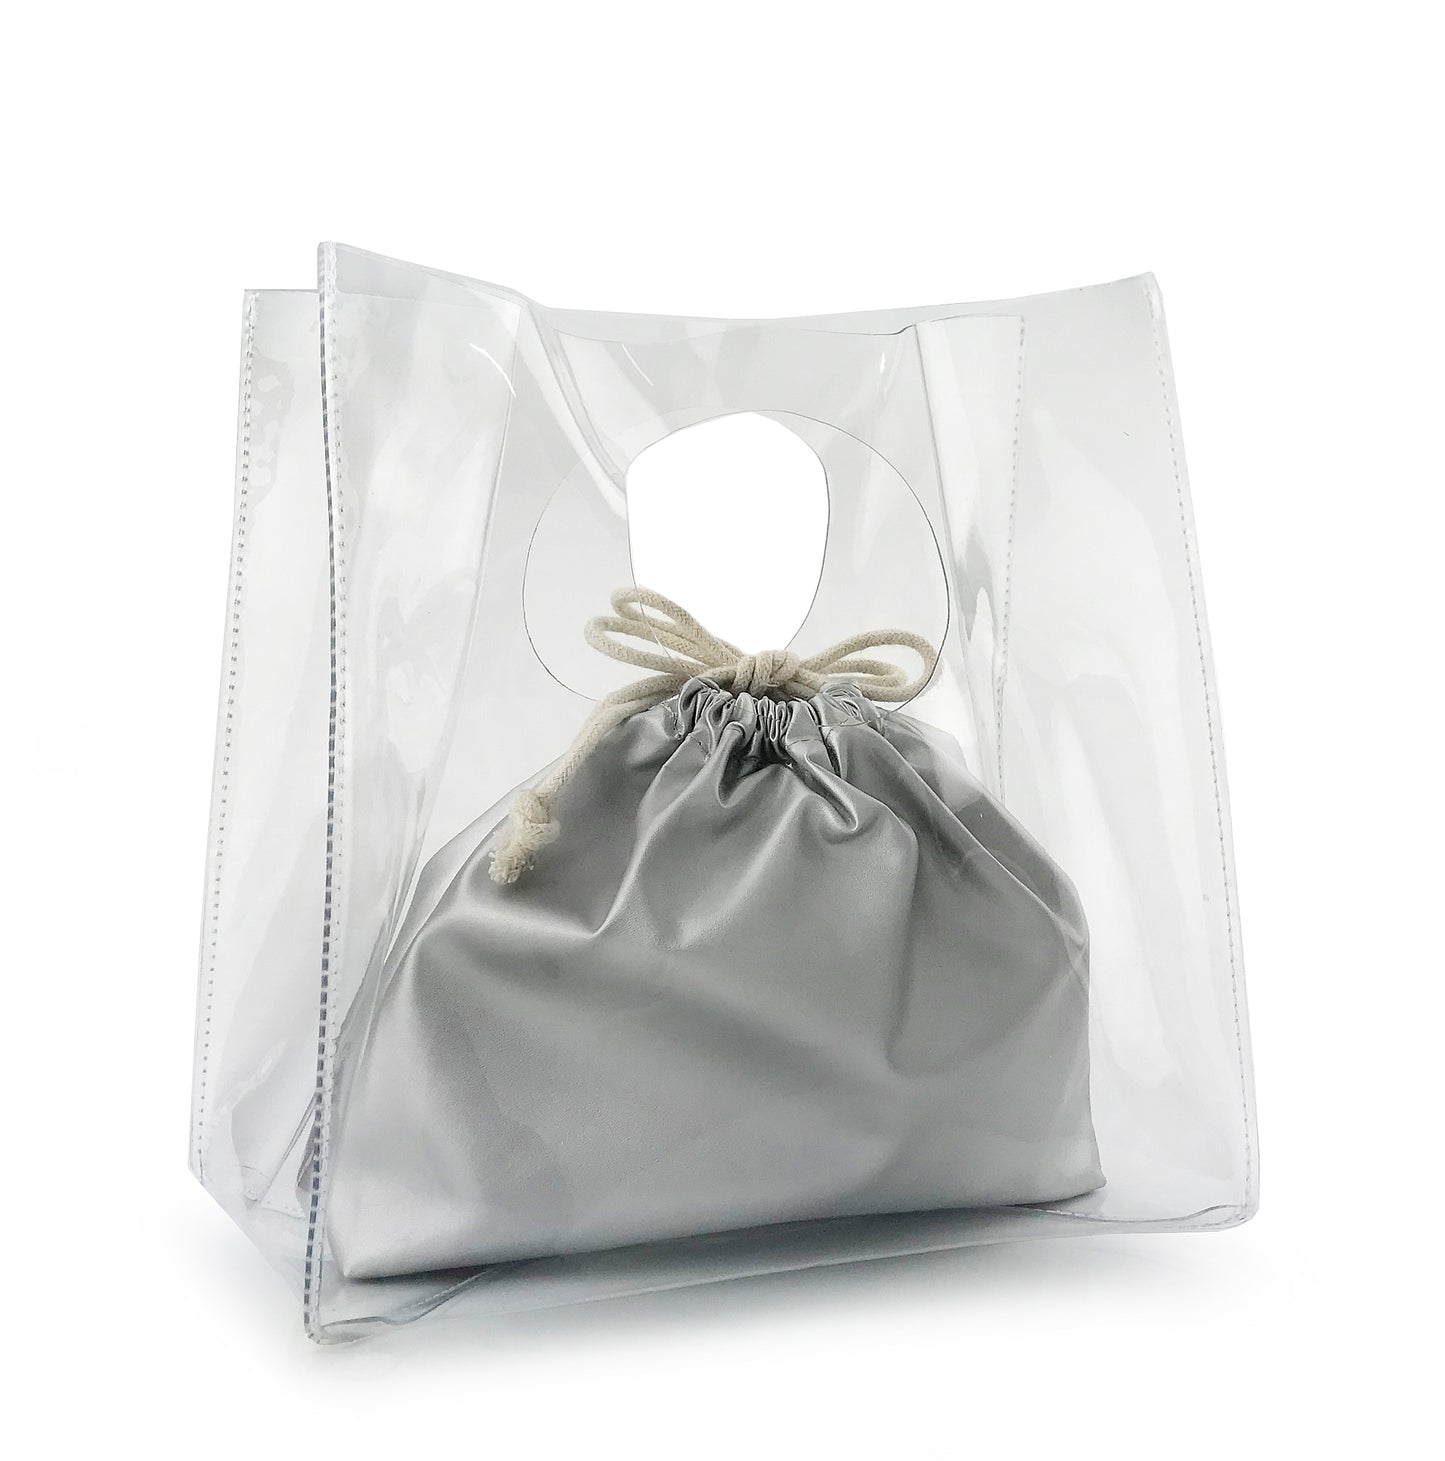 Minimalist Clear Handbag Womens Clutch with Drawstring Pouch - Hoxis Bags